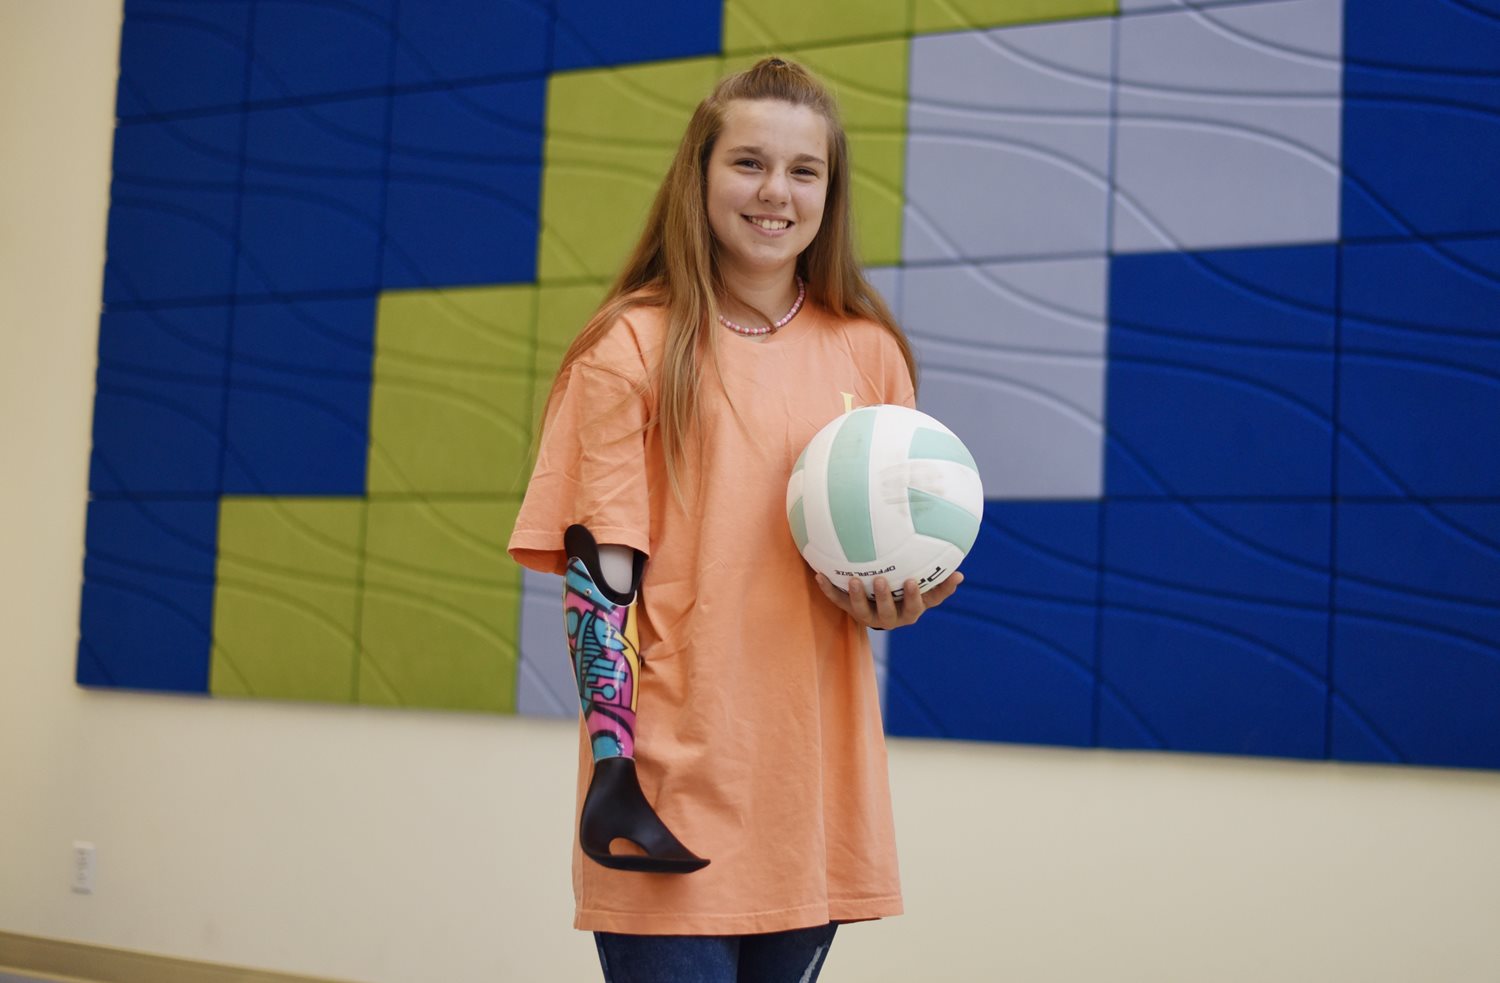 Patient with volleyball and fashionable prosthetic arm